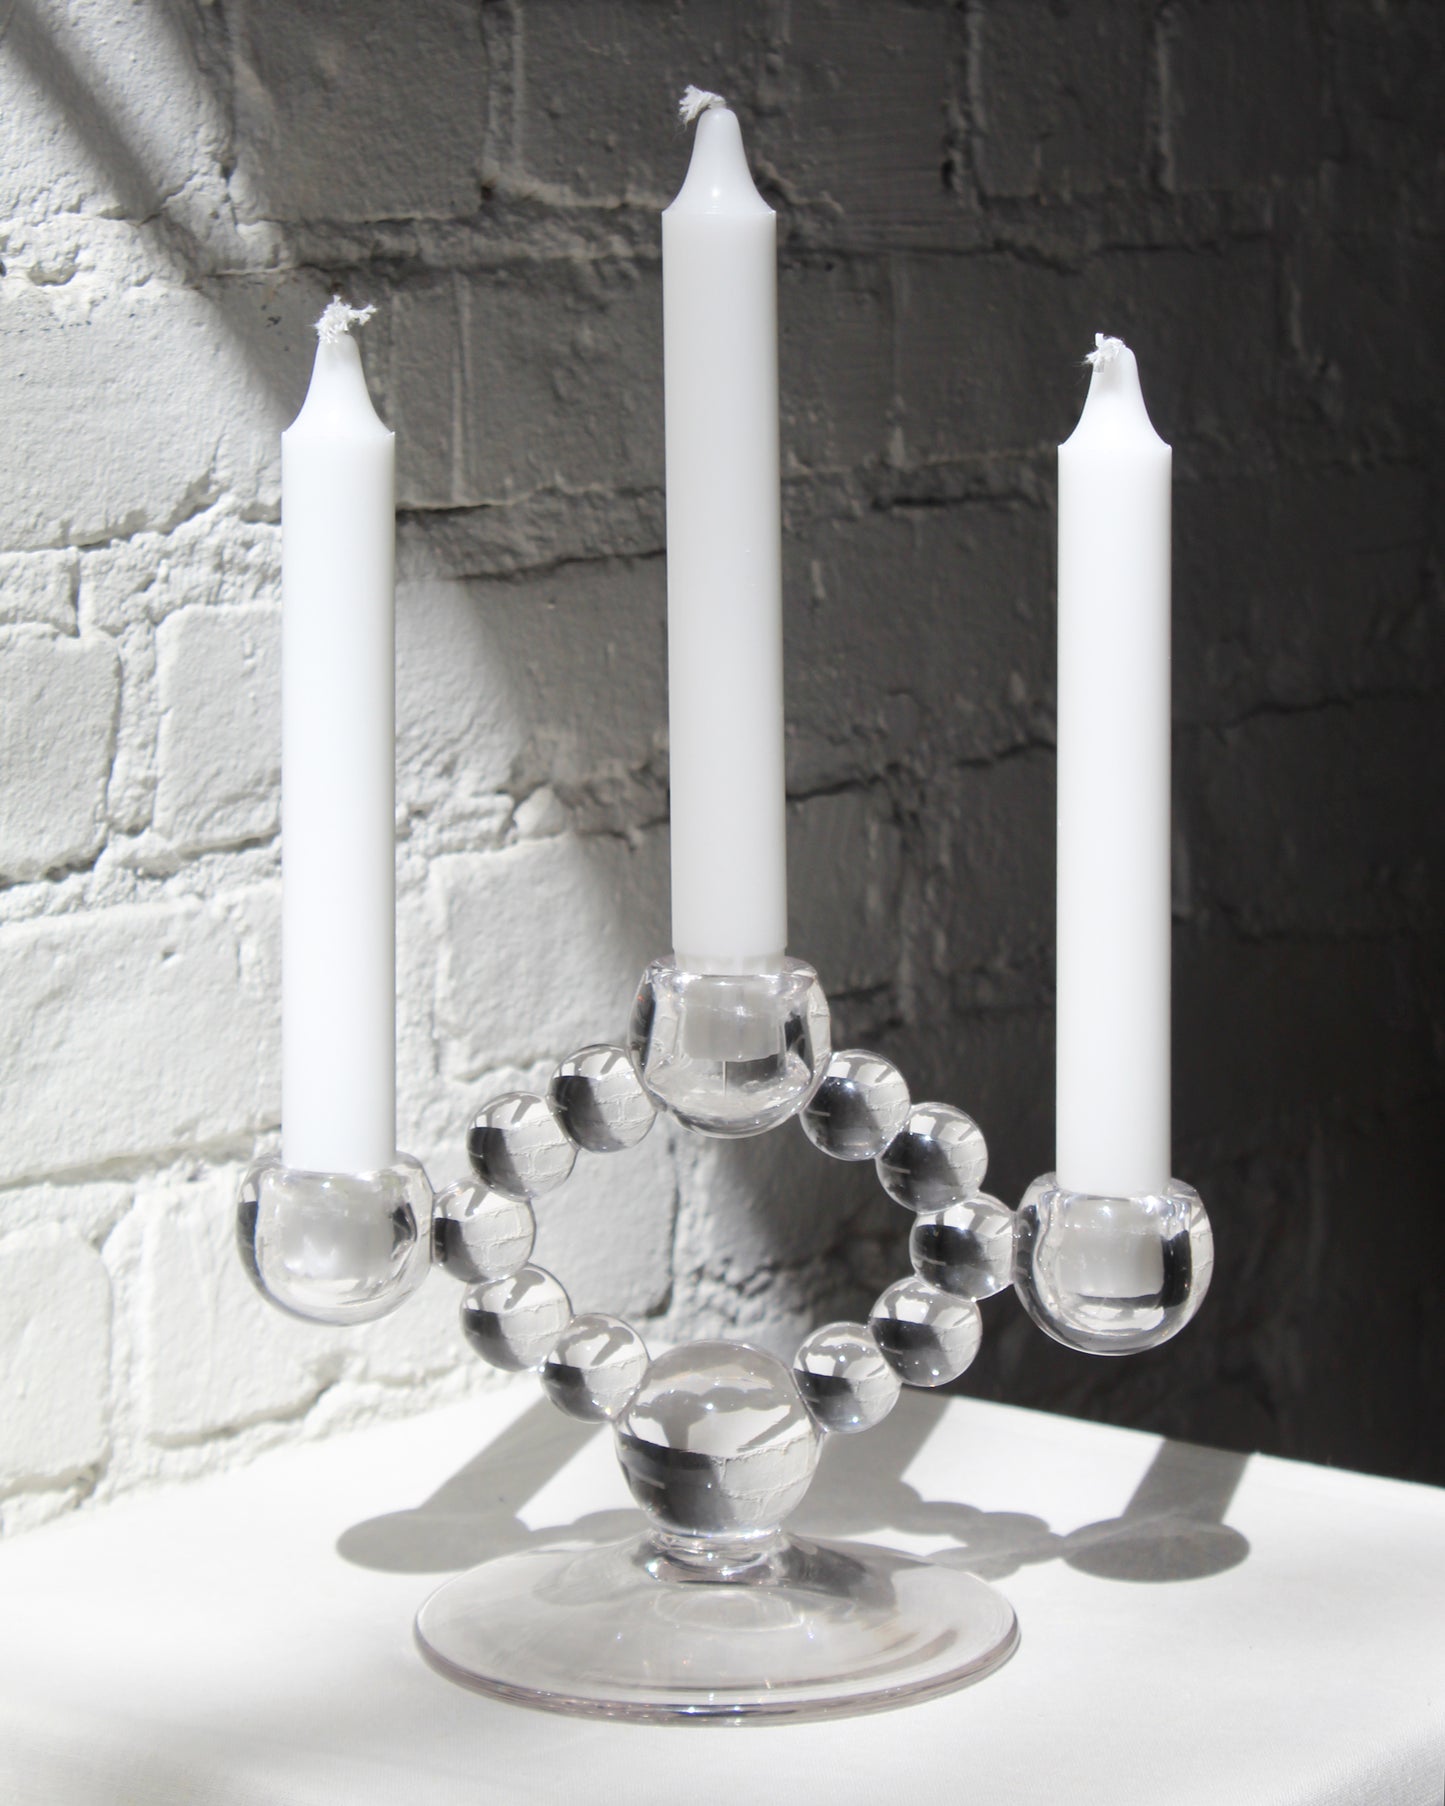 9 CHRISTOPHER Classic Taper Candle in White available at Lahn.shop